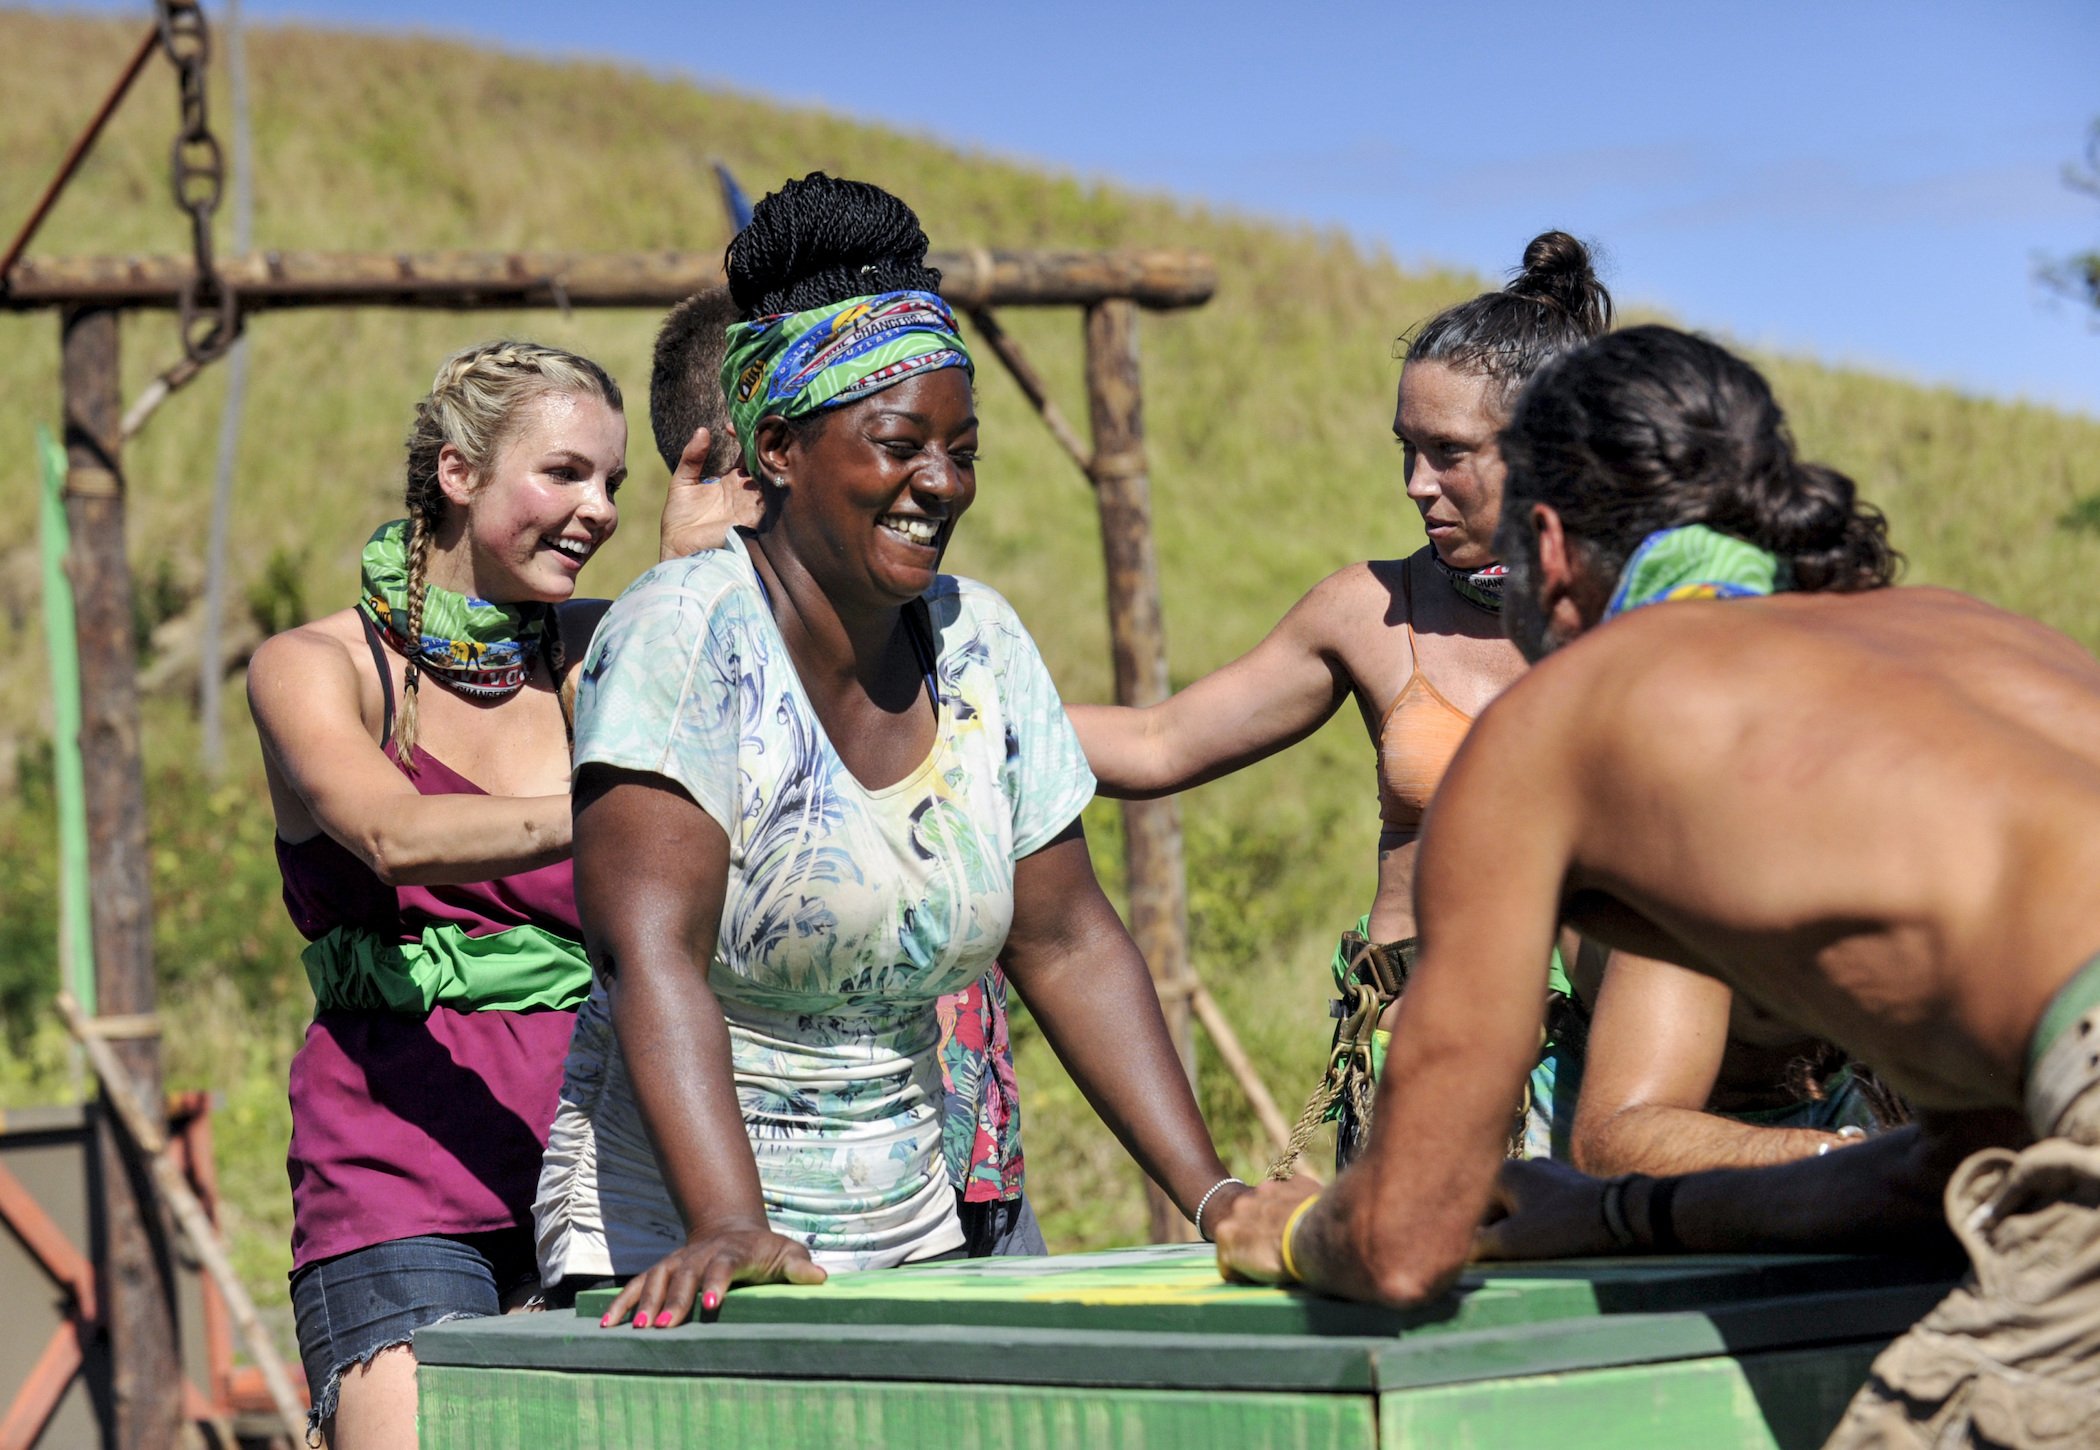 Cirie Fields laughing with a contestant on the beach in 'Survivor: Game Changers' 